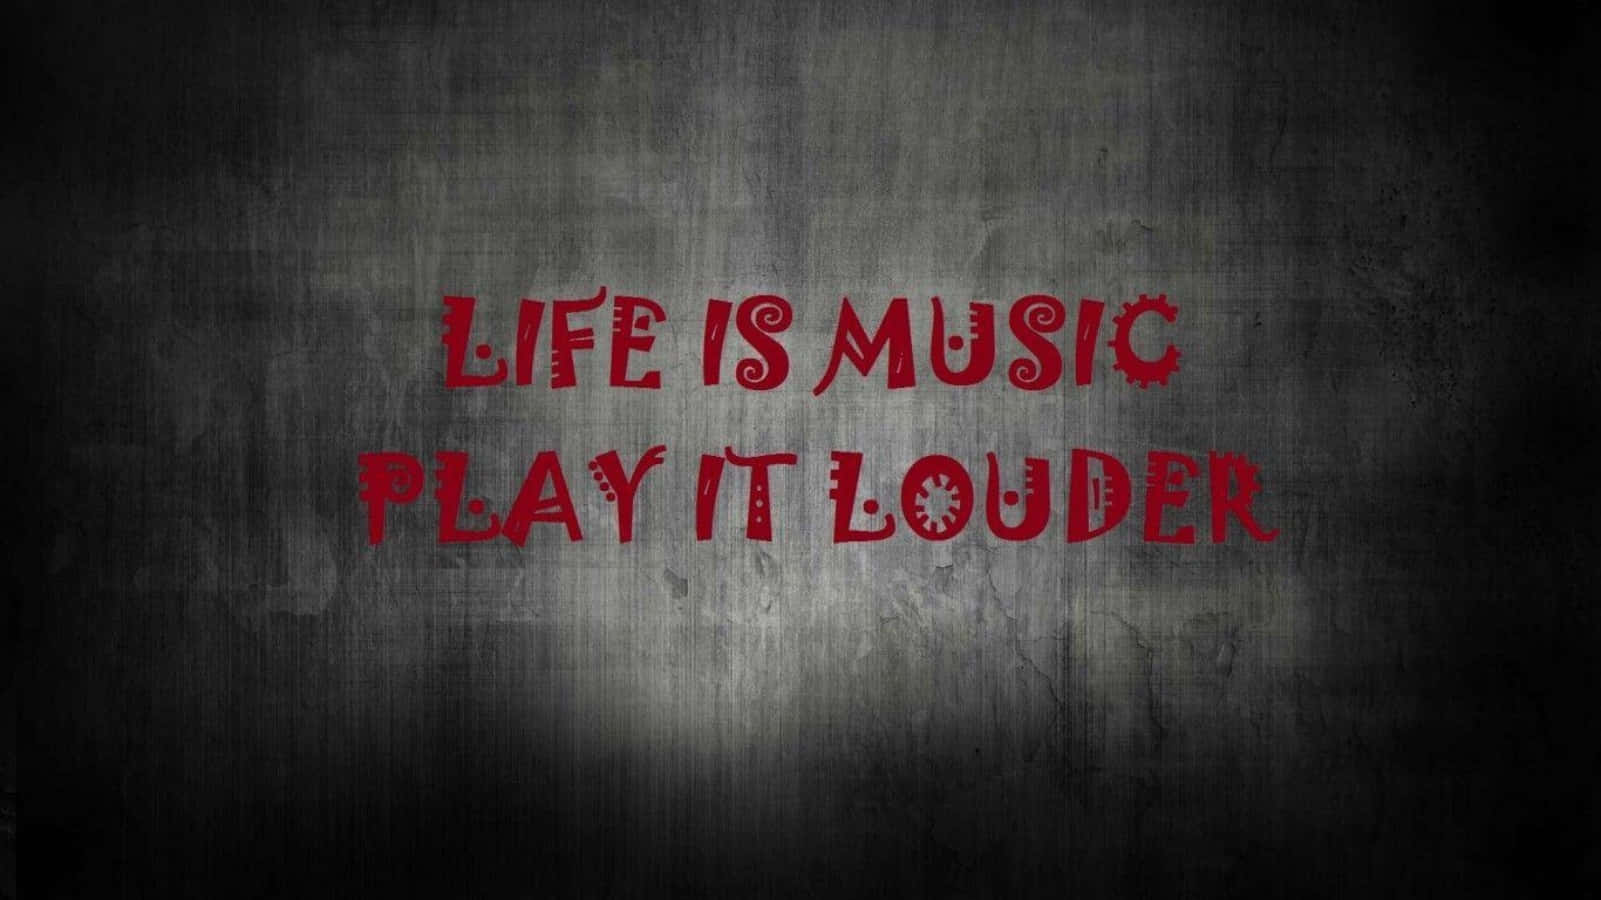 "Music is the soundtrack of life" Wallpaper